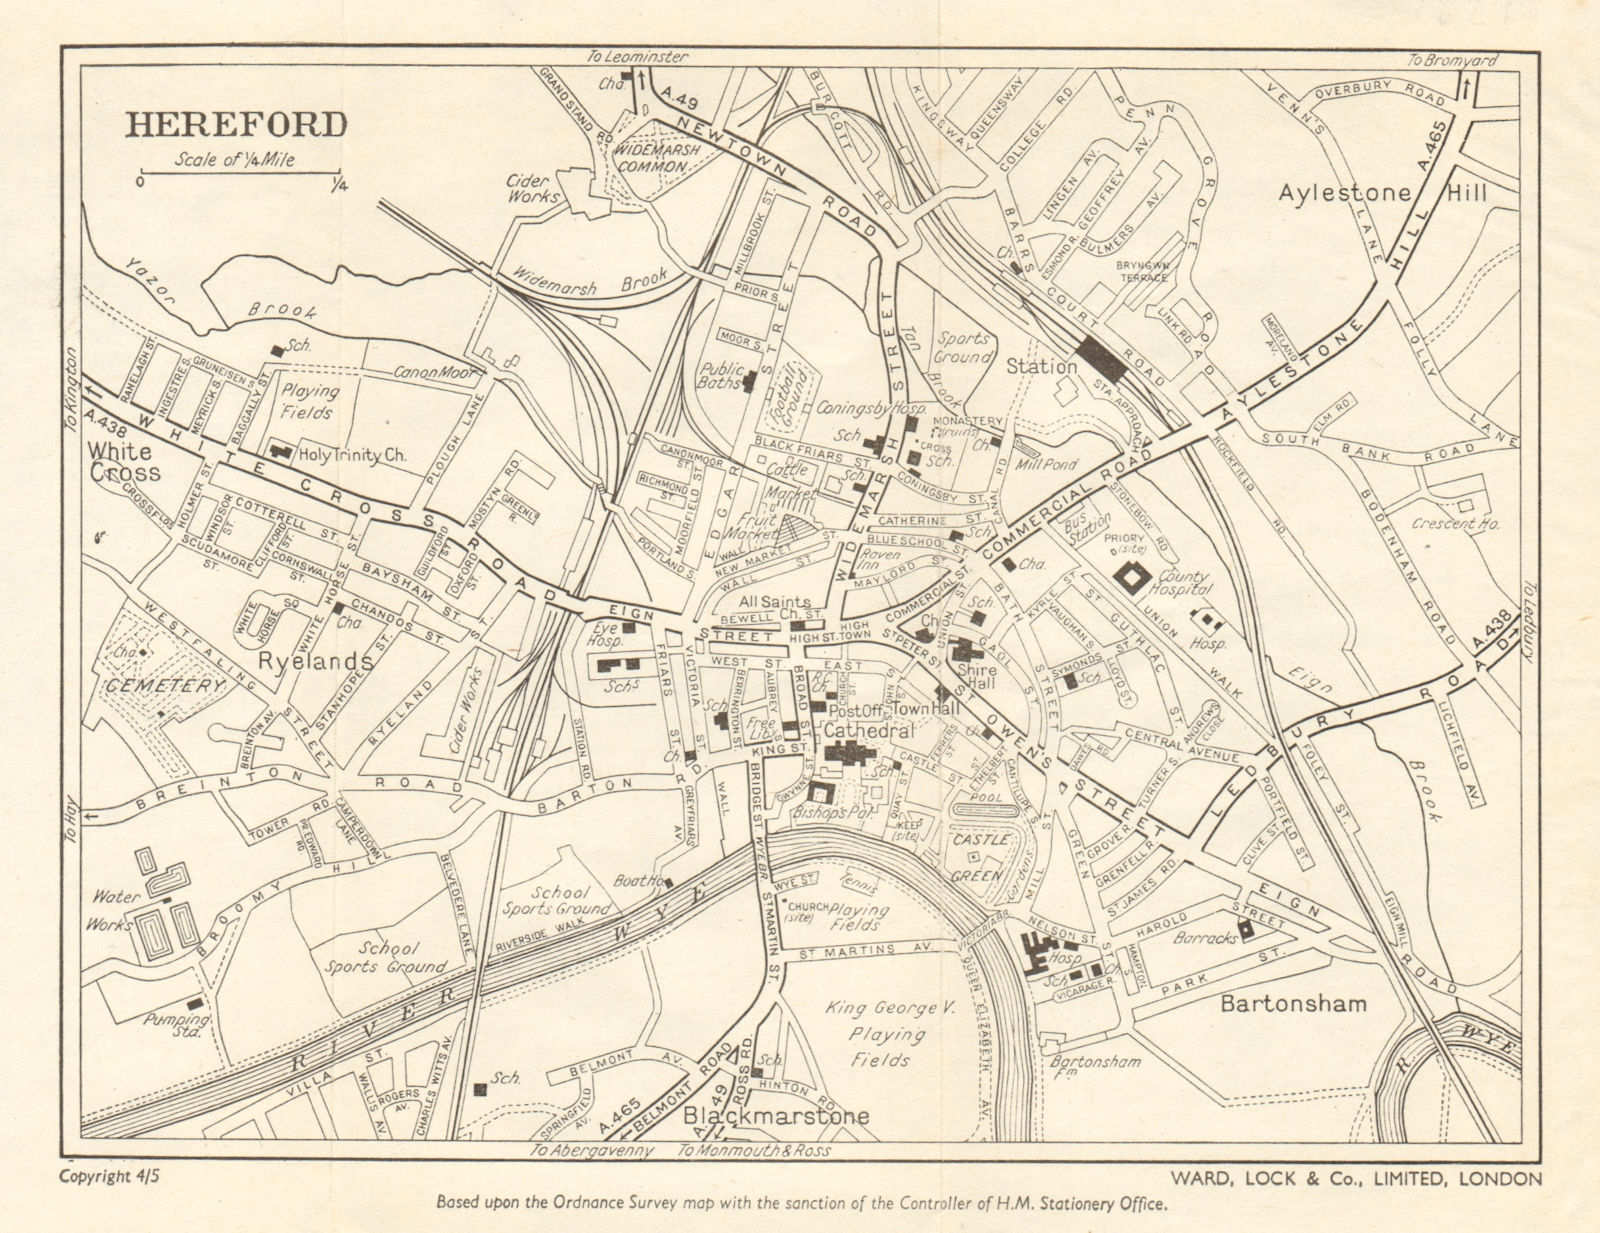 Associate Product HEREFORD vintage town/city plan. Herefordshire. River Wye. WARD LOCK 1955 map